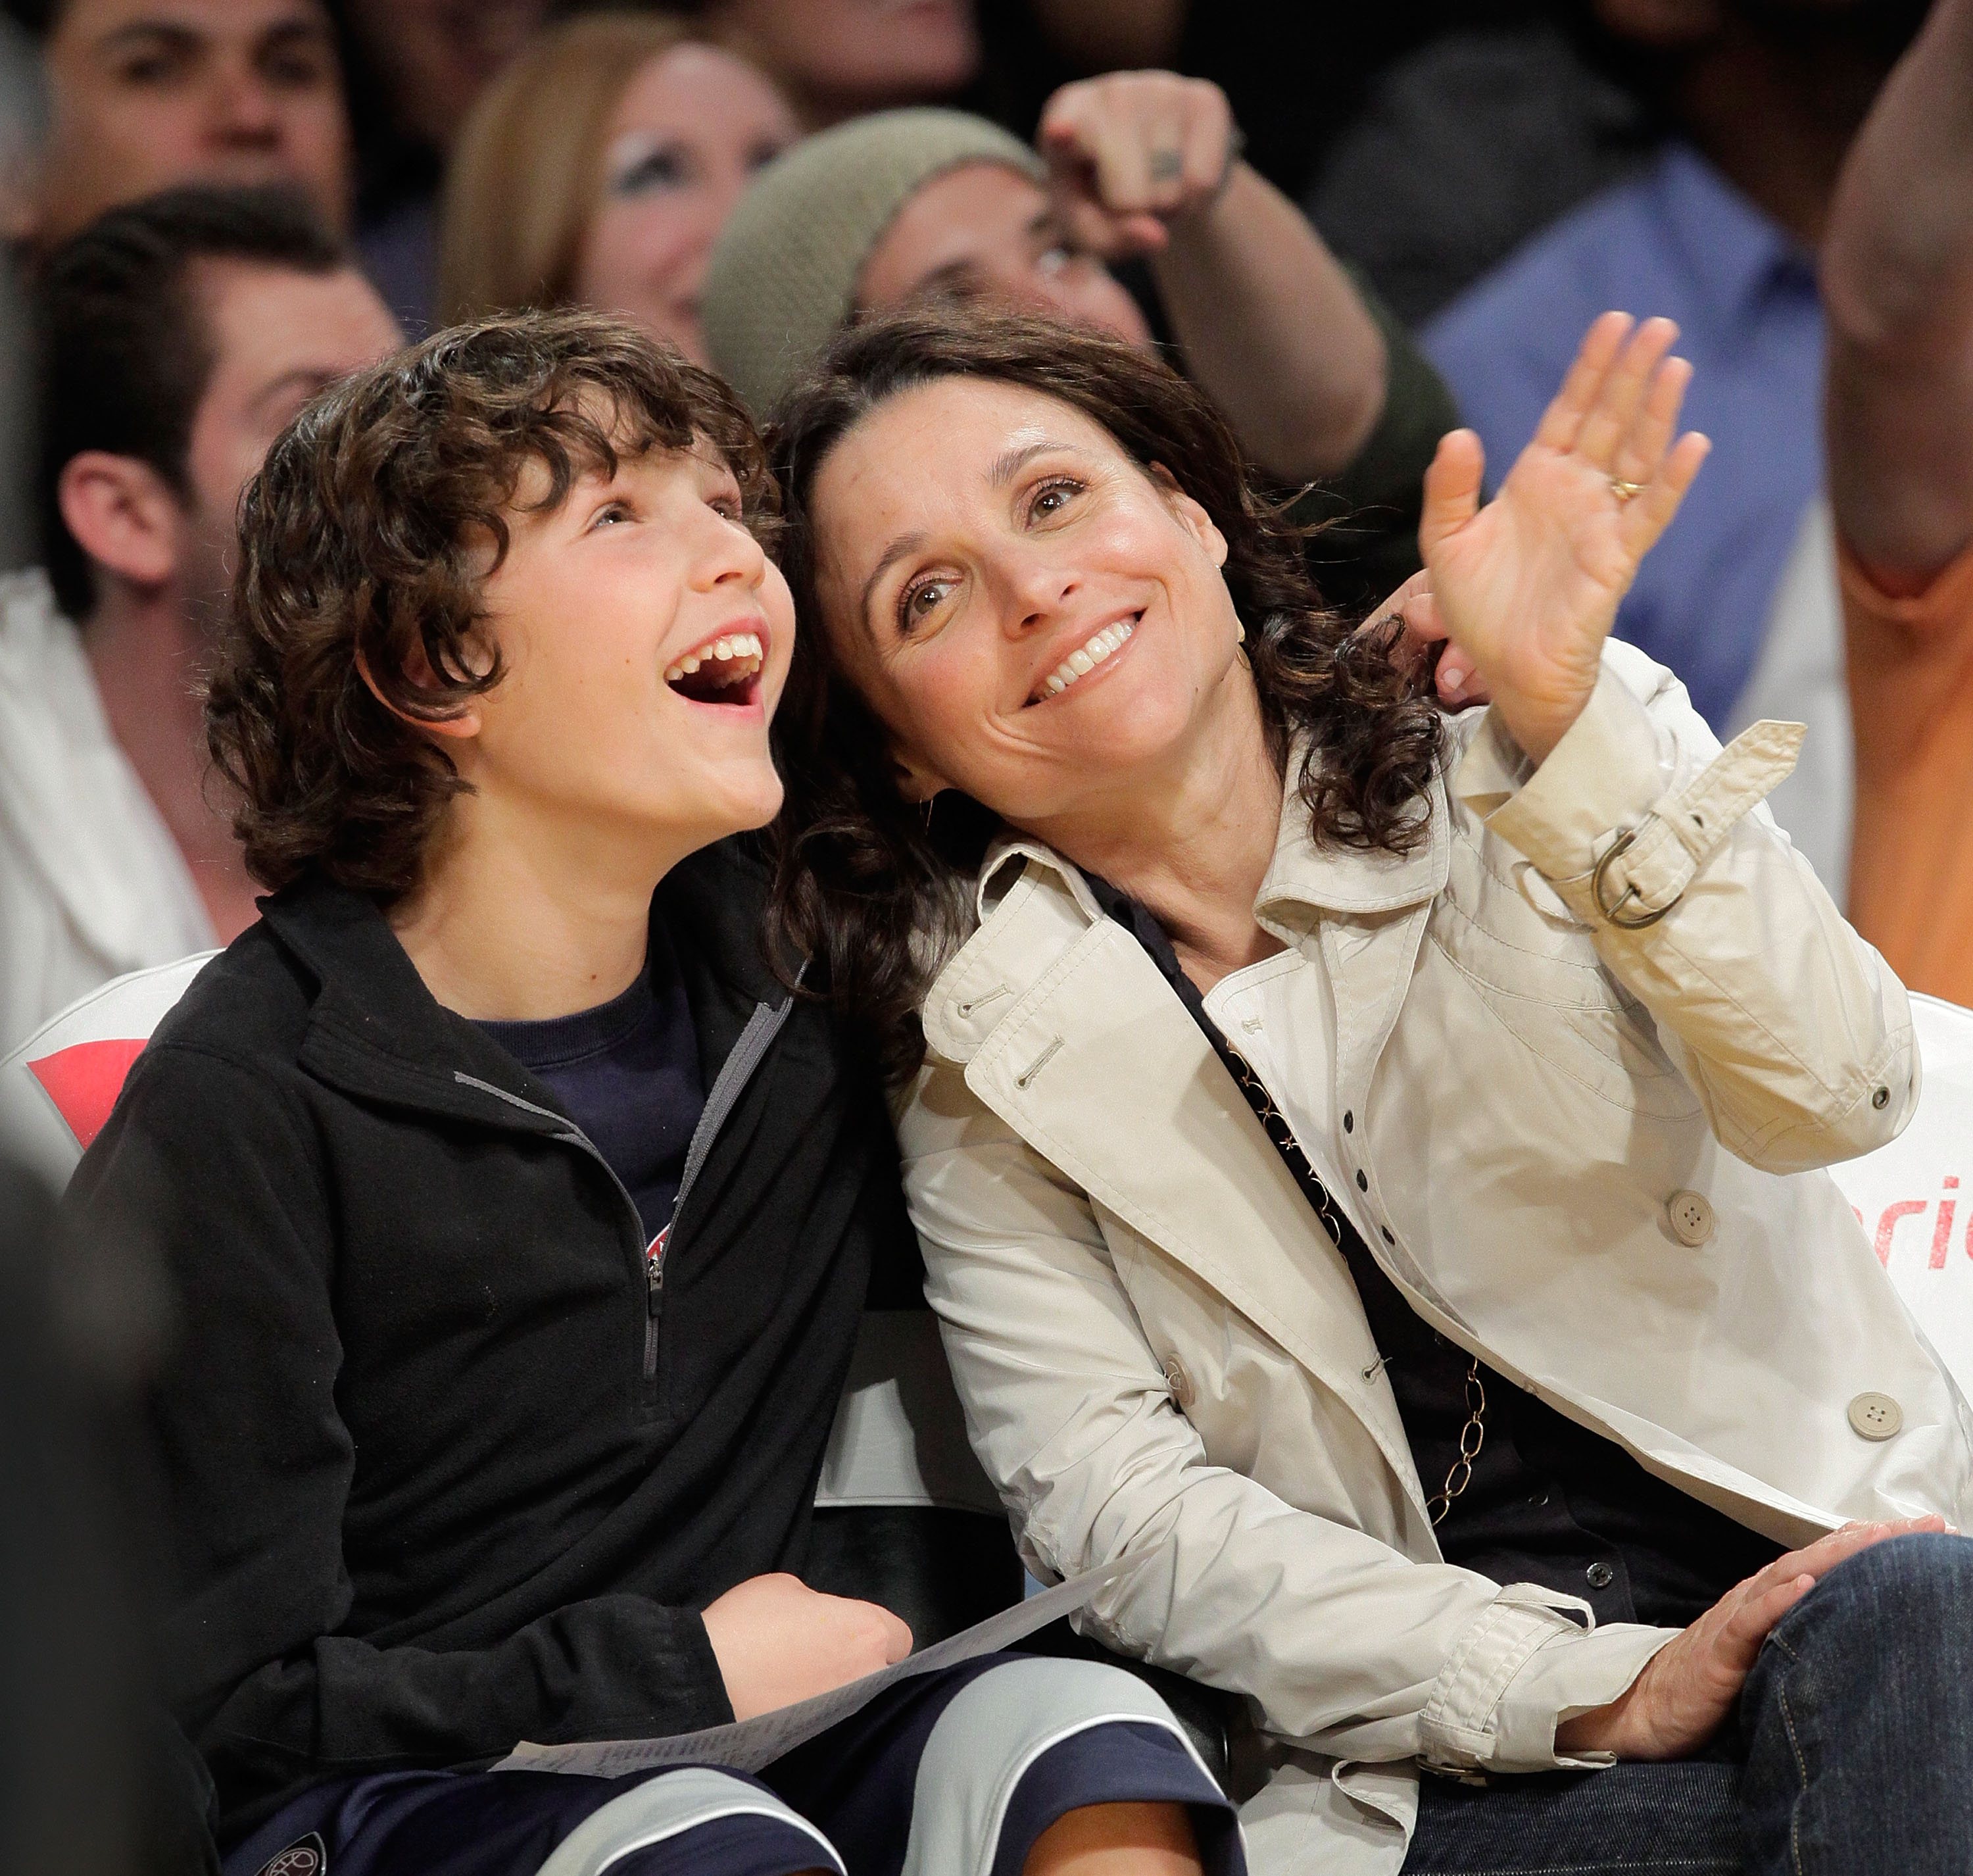 <p>"Veep" and "Seinfeld" star <a href="https://www.wonderwall.com/celebrity/profiles/overview/julia-louis-dreyfus-1190.article">Julia Louis-Dreyfus</a> brought son Charlie Hall, who was about 12 at the time, to see the New Orleans Hornets play the Los Angeles Lakers at the Staples Center in Los Angeles on Dec. 1, 2009. Keep reading to see "Moxie" star Charlie -- and big brother Henry -- as adults...</p>